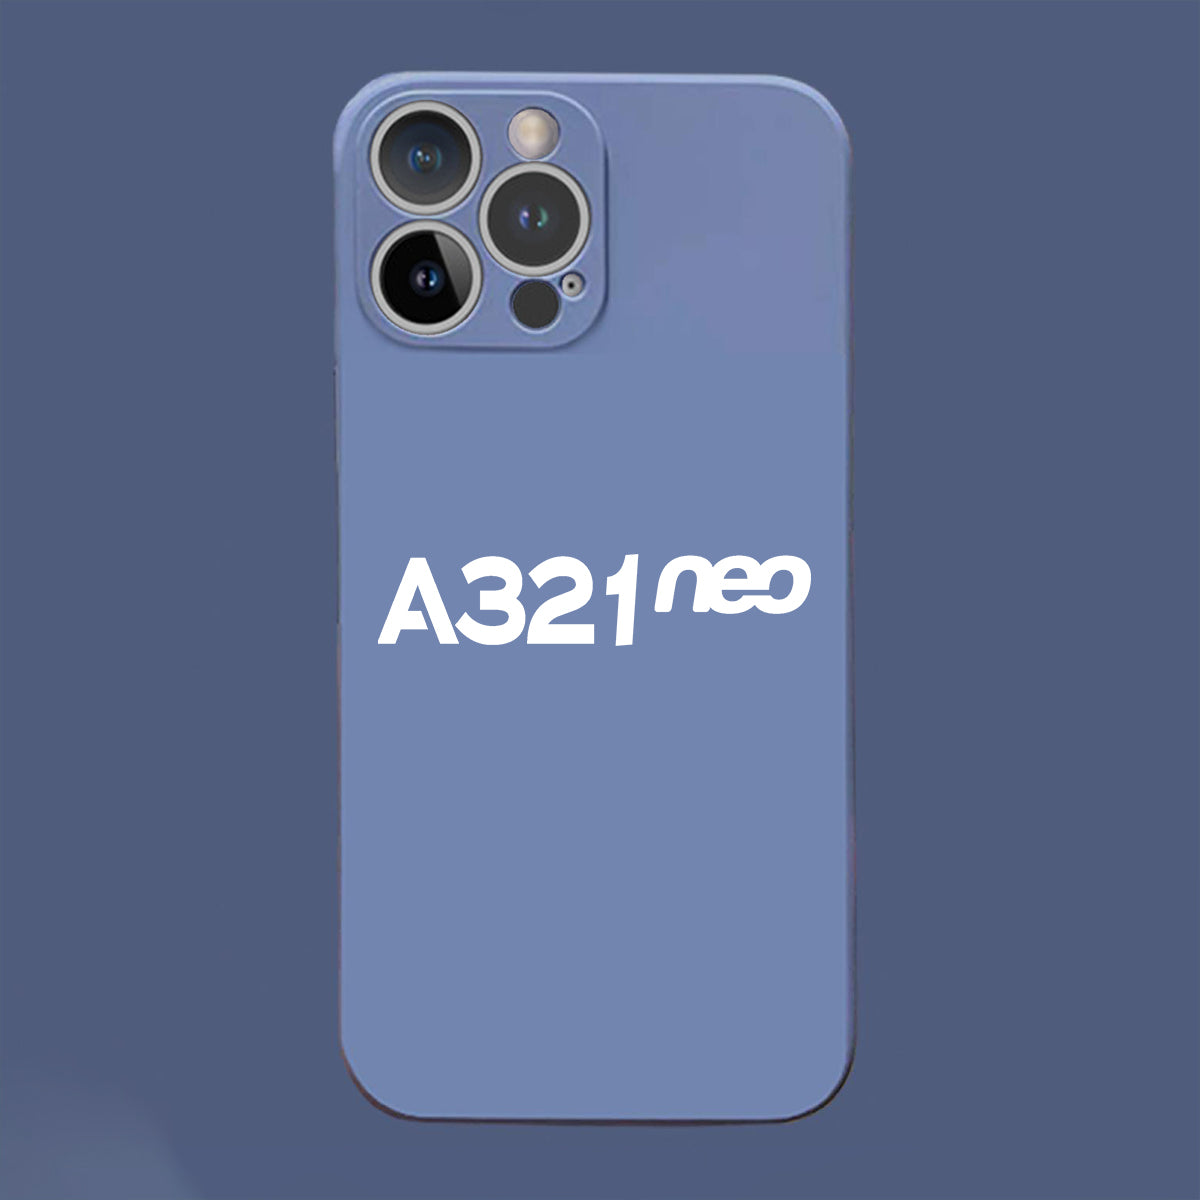 A321neo & Text Designed Soft Silicone iPhone Cases